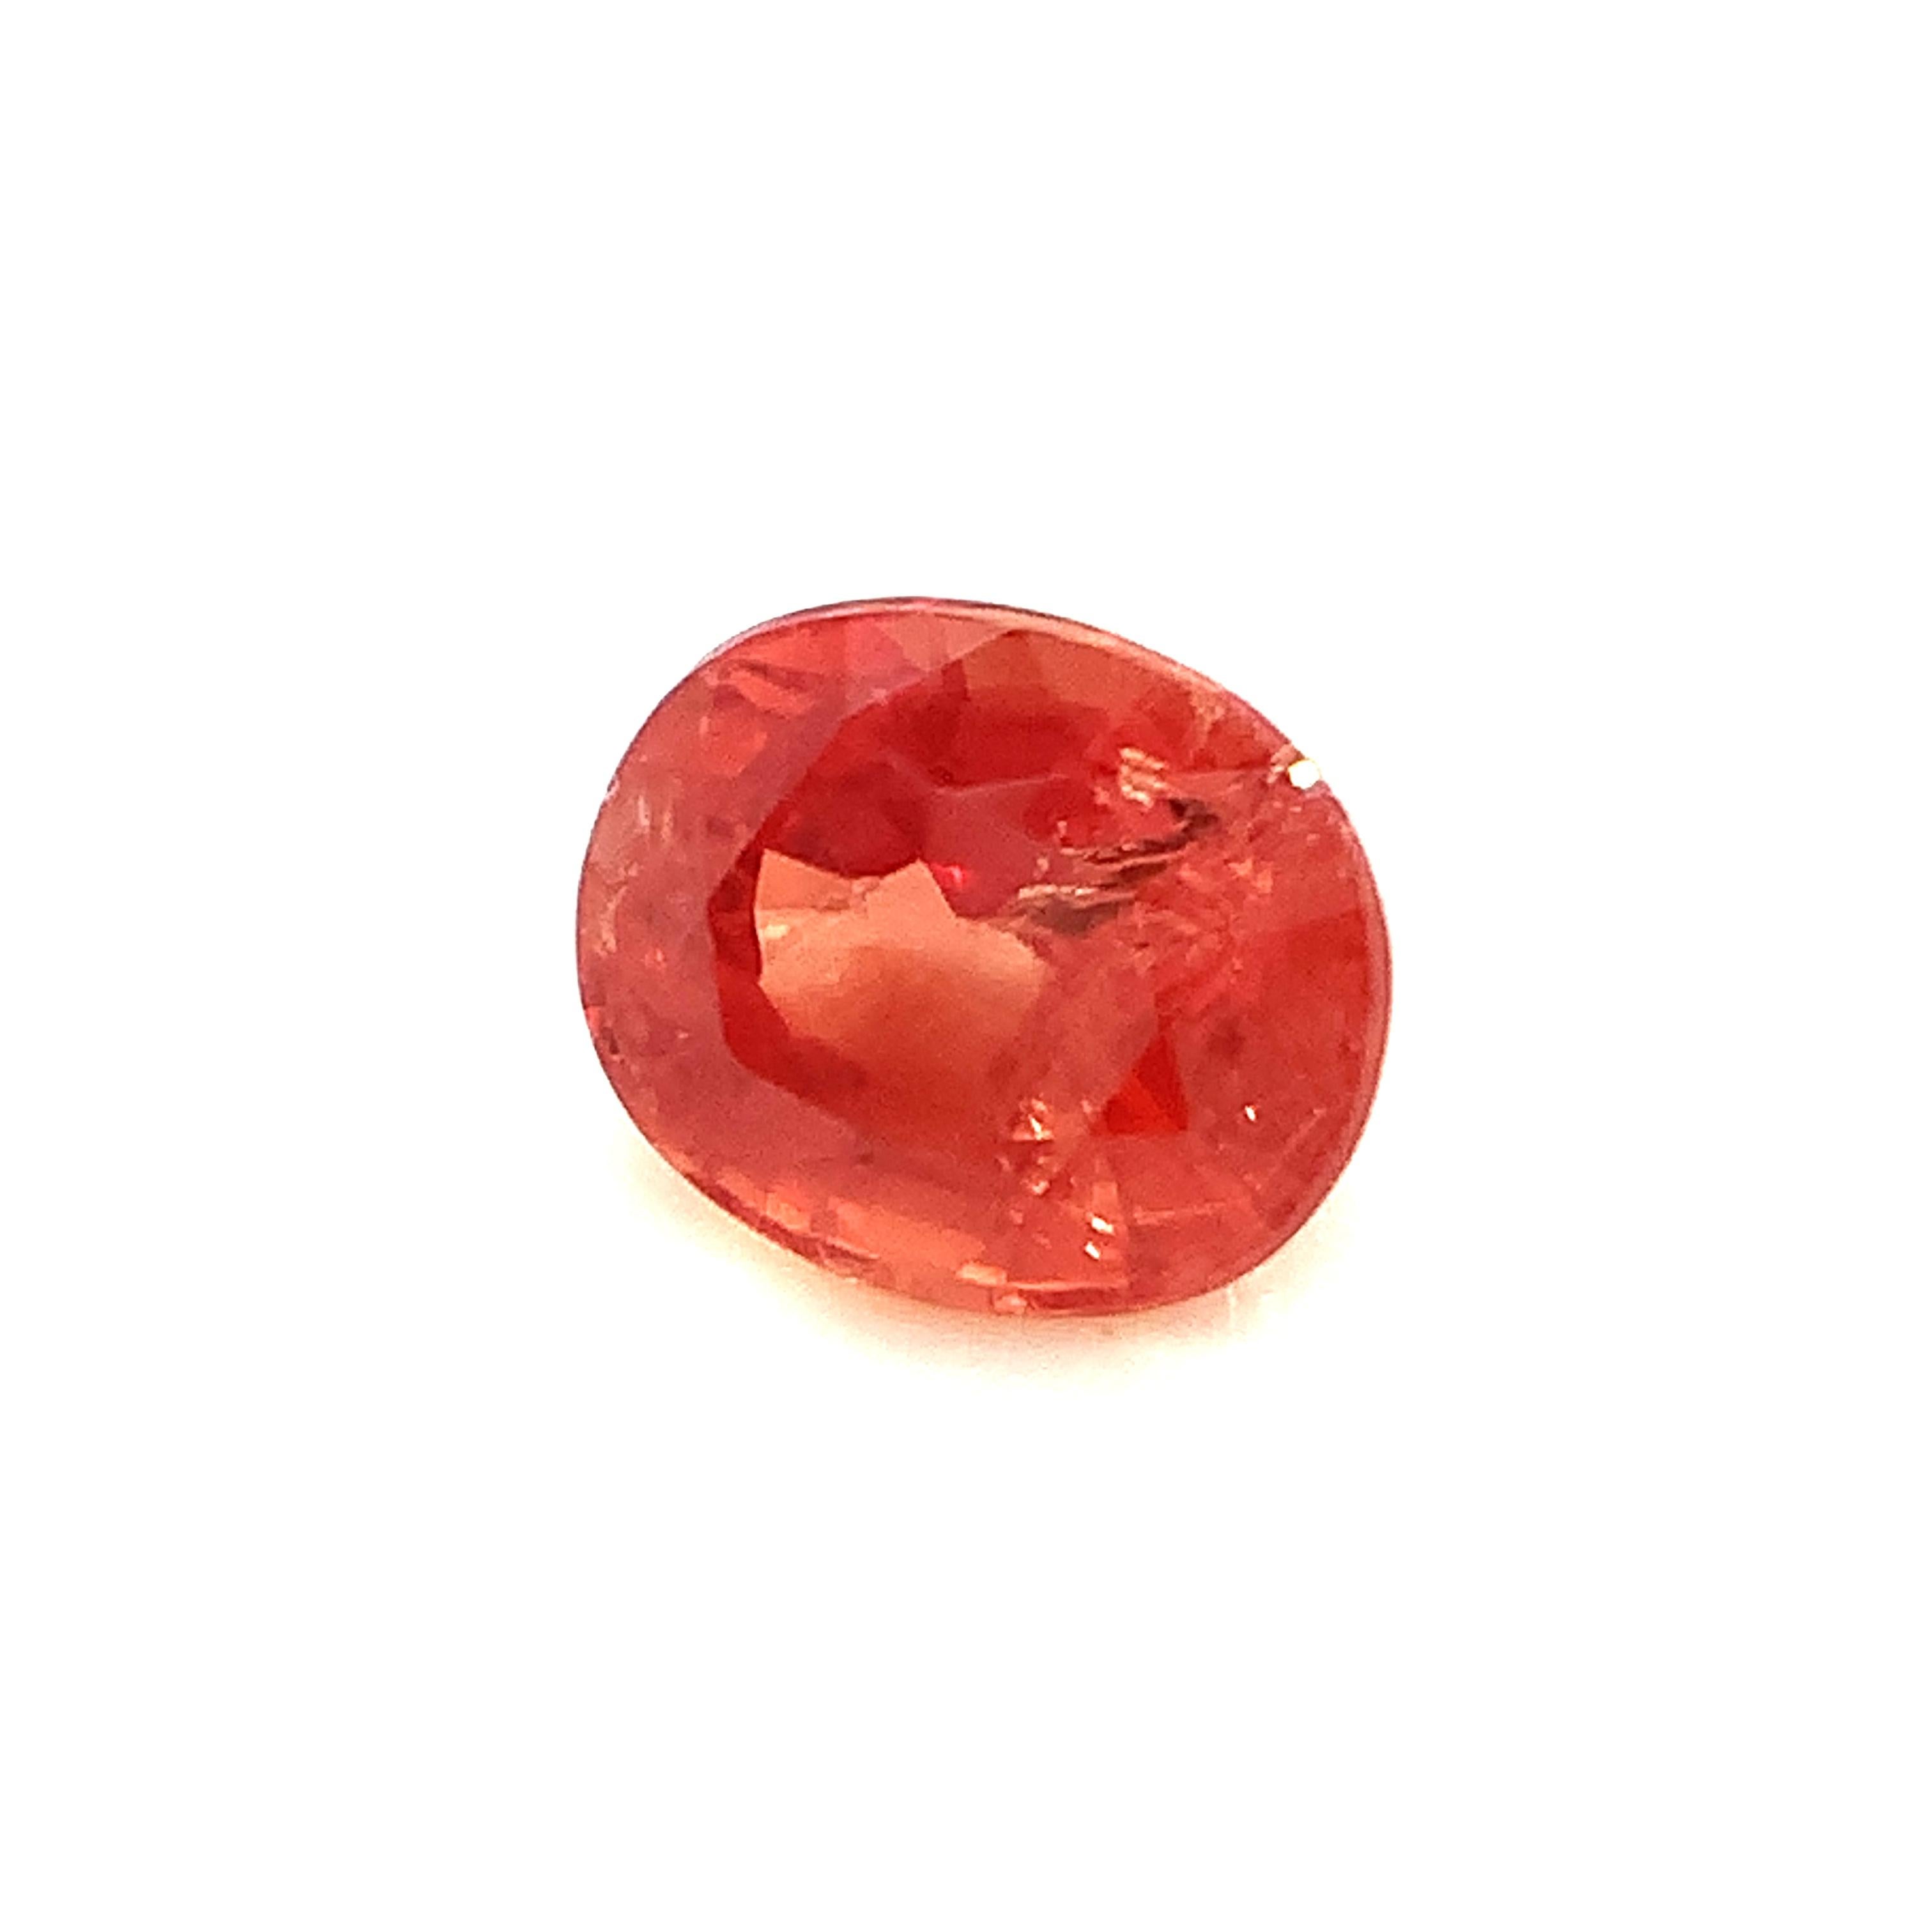 Artisan Unheated .75 Carat Padparadscha Sapphire, Unset Loose Gemstone, GIA Certified For Sale